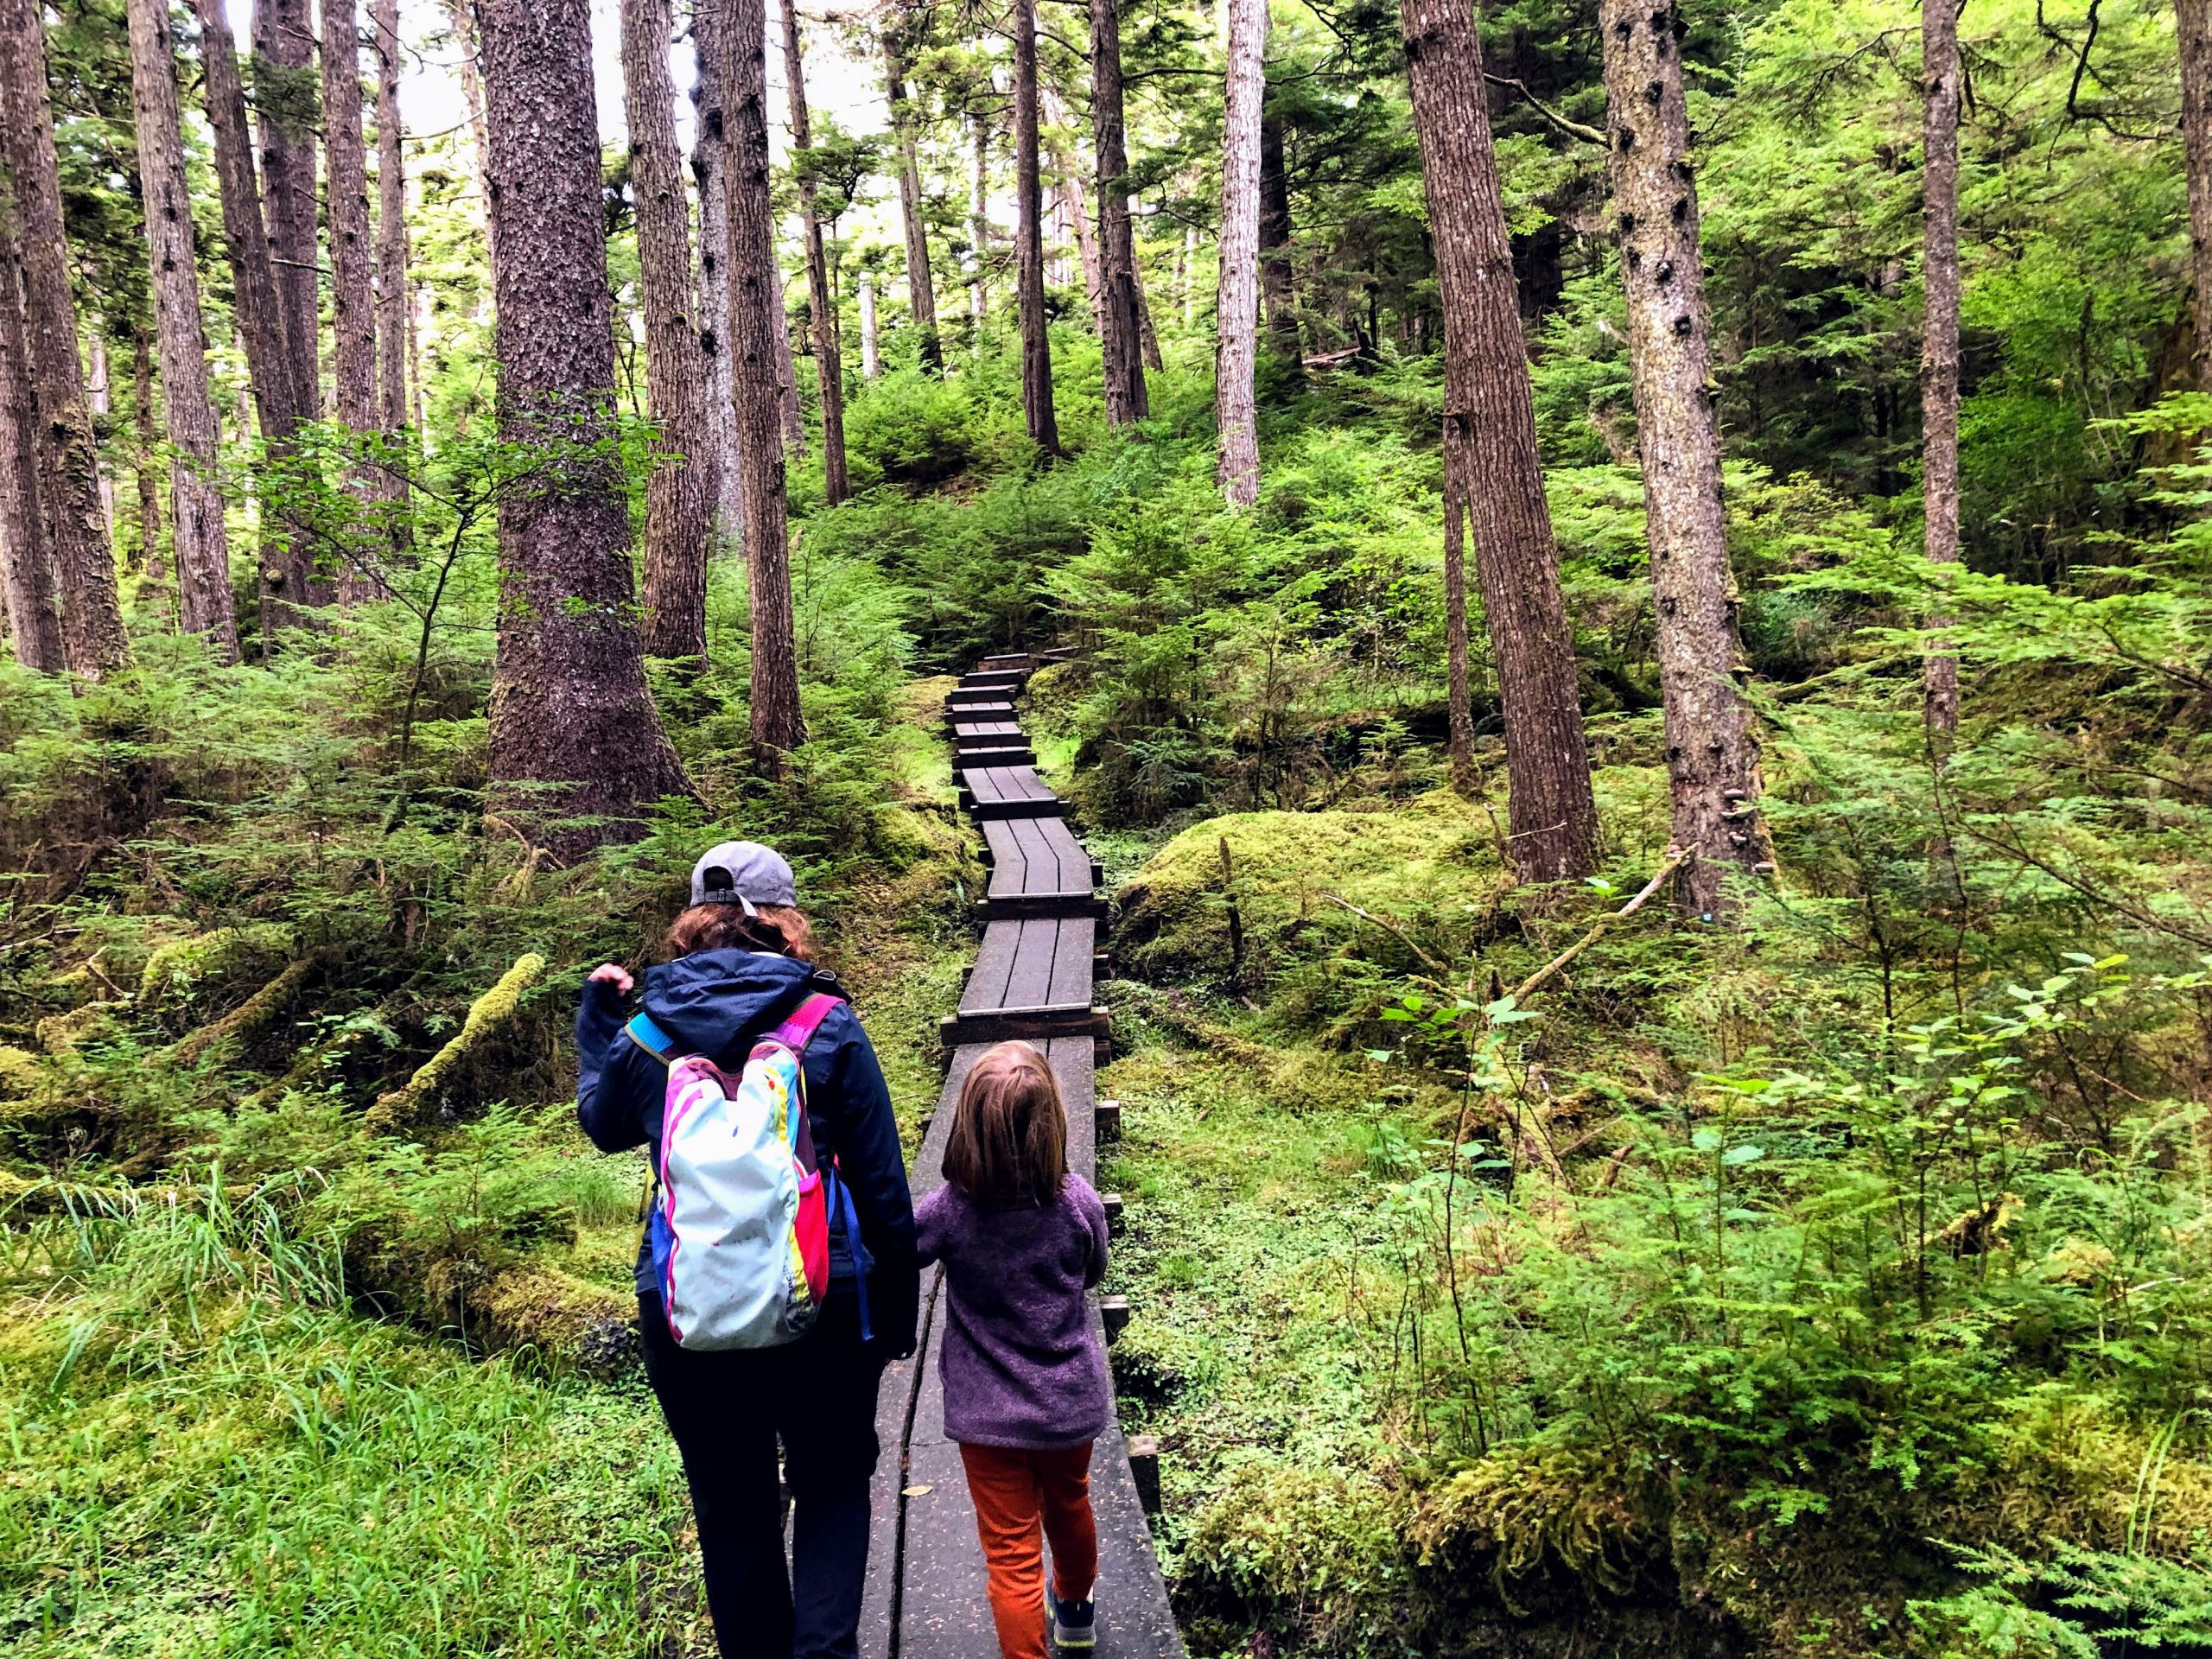 A Mother And Daughter Walking Together Side By Side Exploring The Beautiful Forests Of Tow Hill,